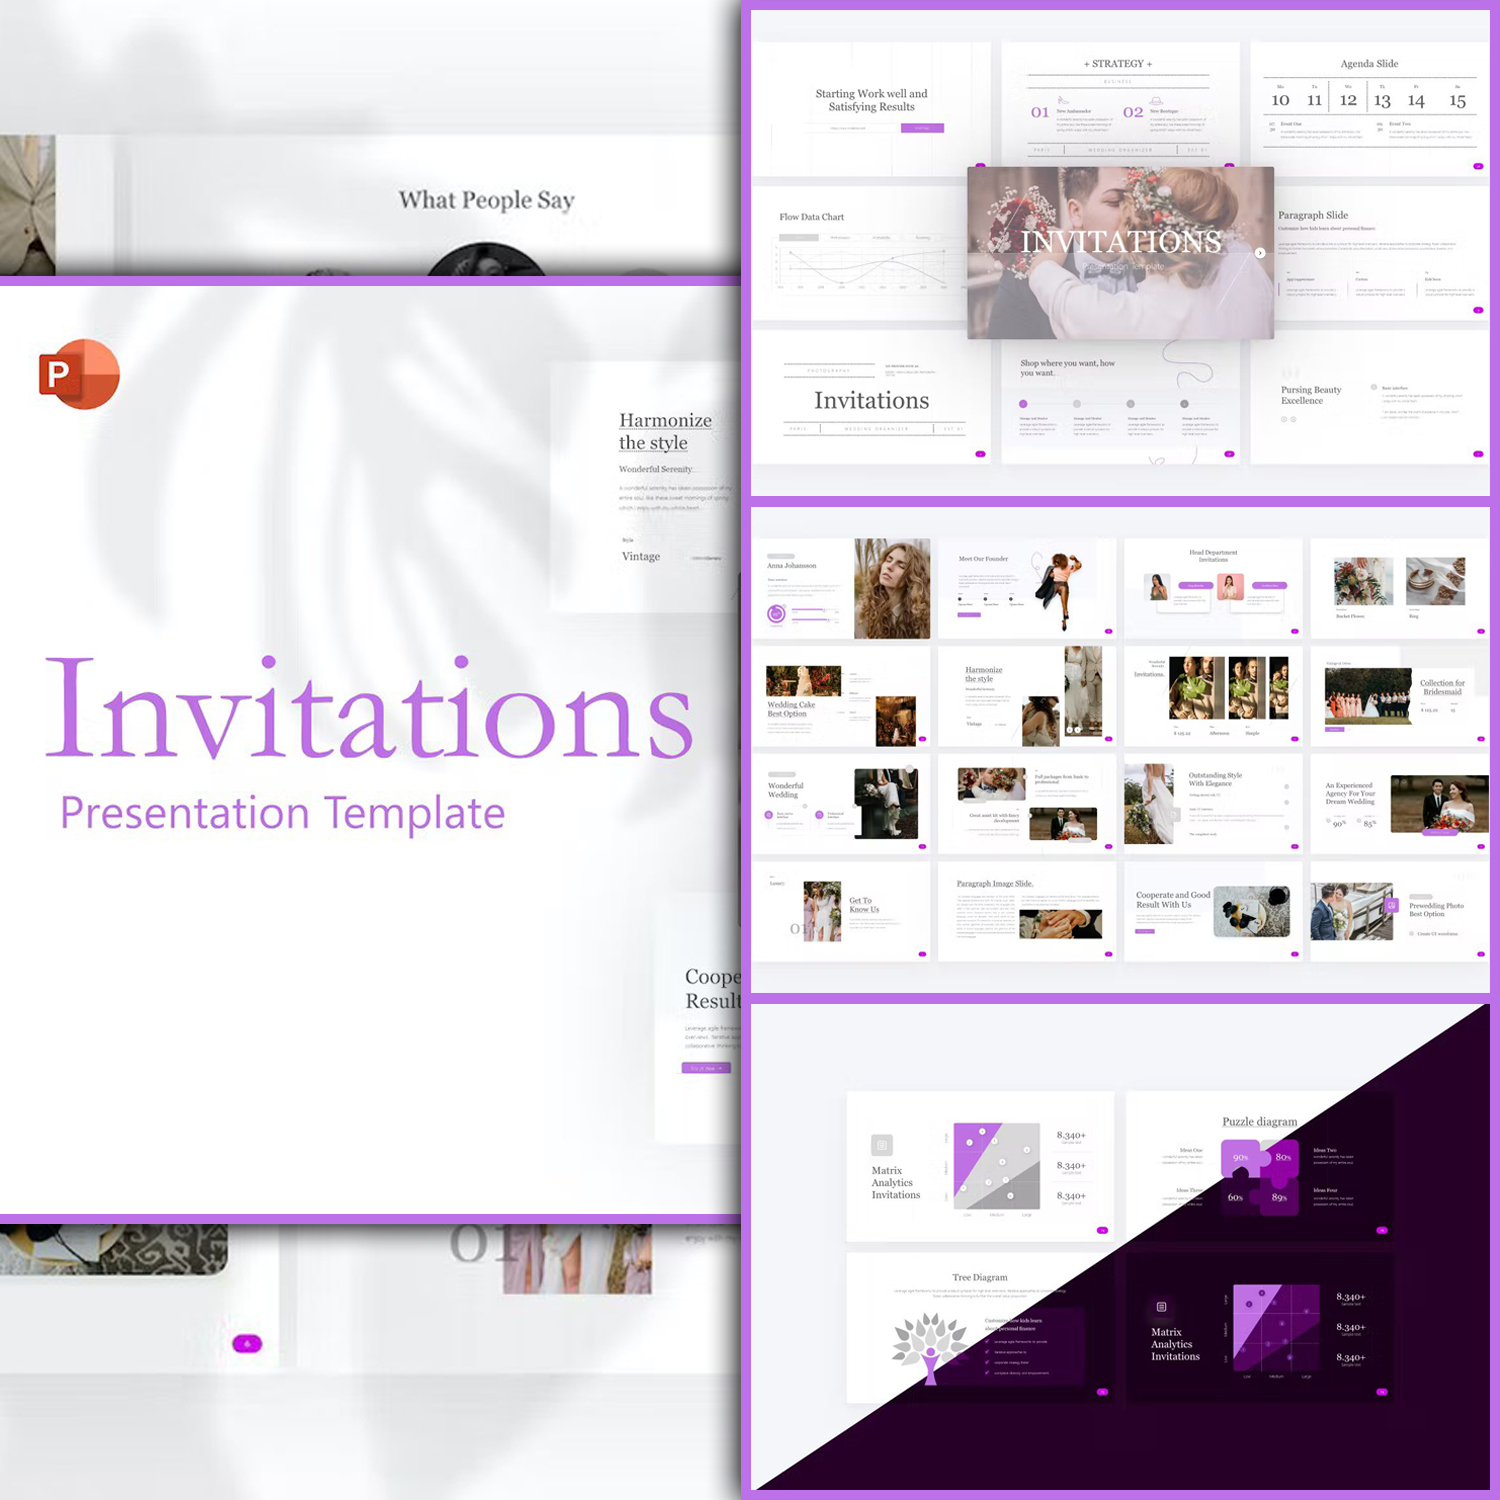 invitations simple powerpoint template b7gte8m 1500 1500 2 635